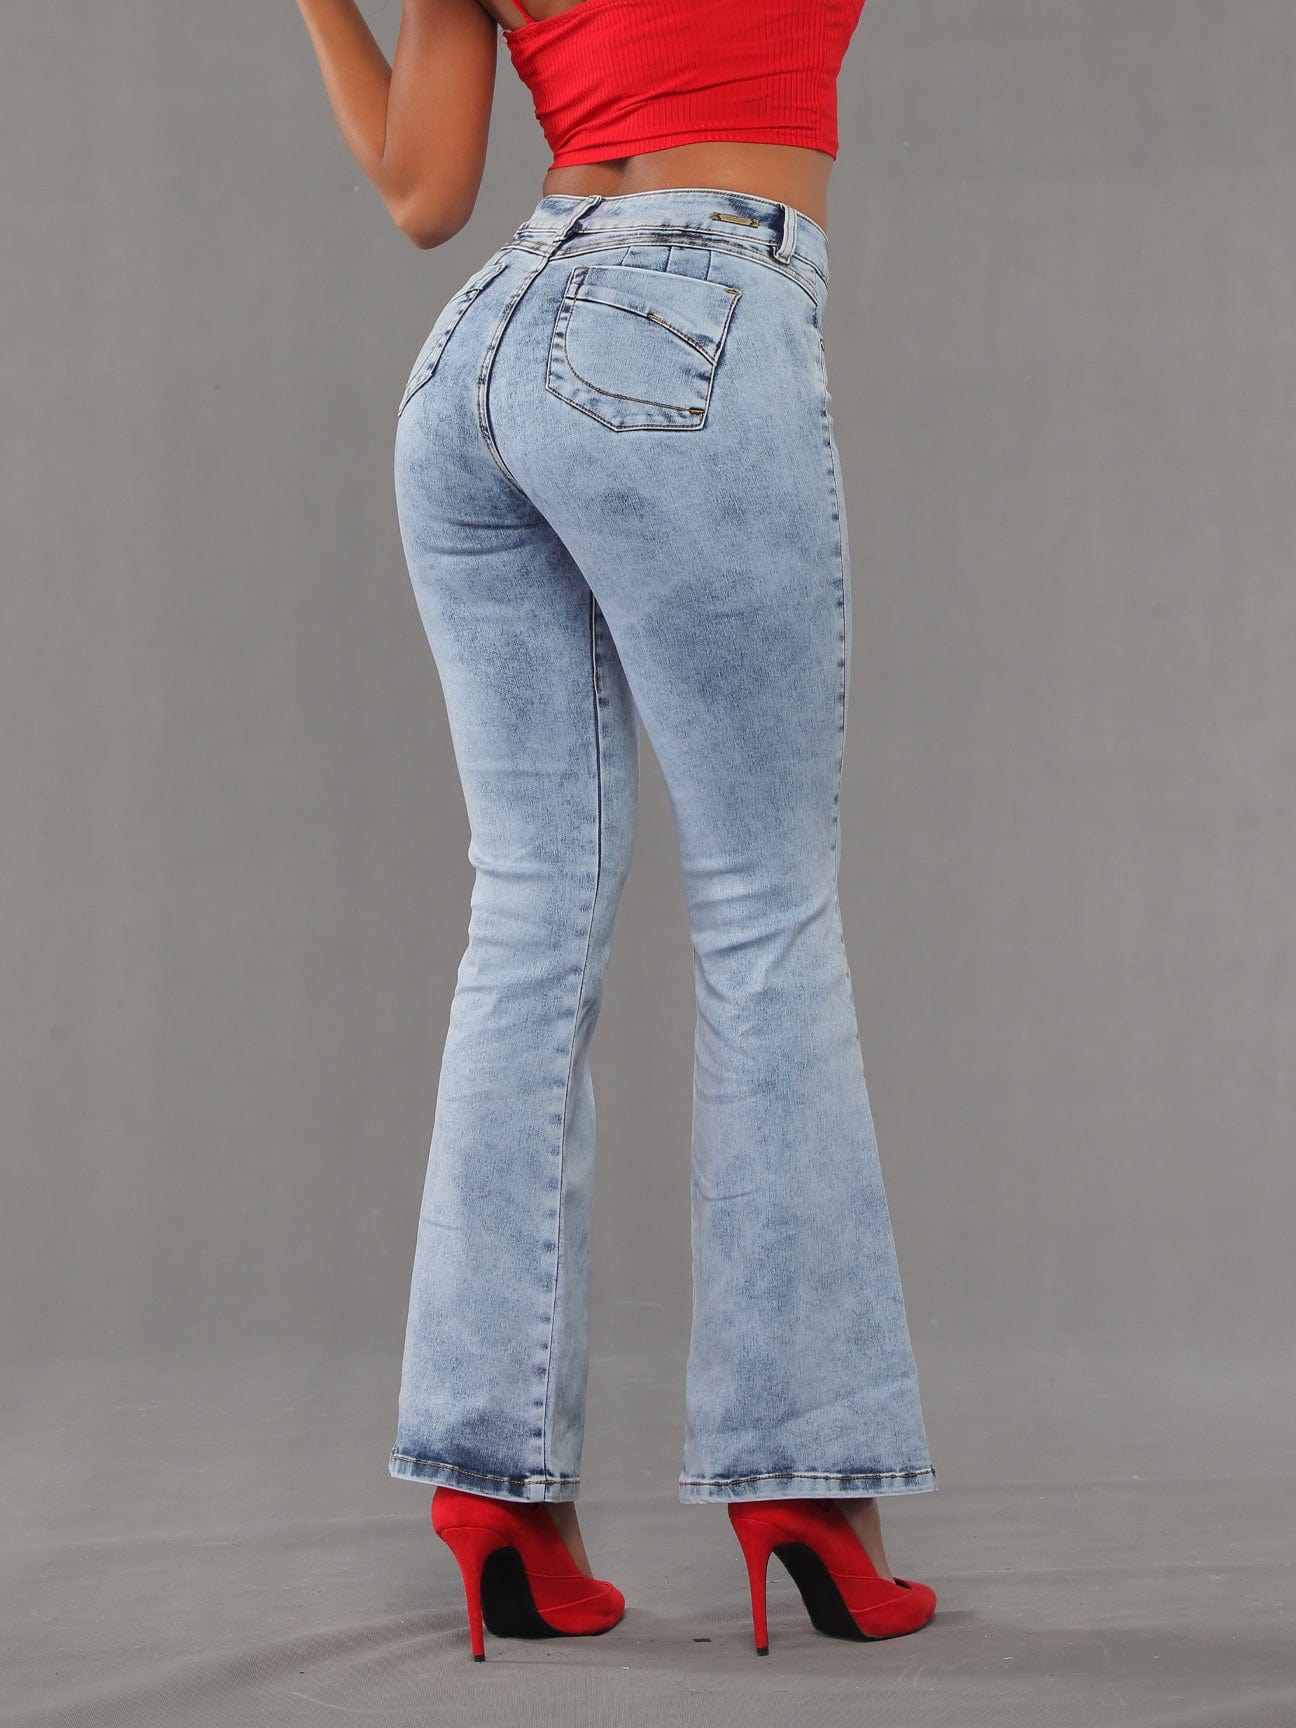 Disco Butt Lift Flare Jeans 14208